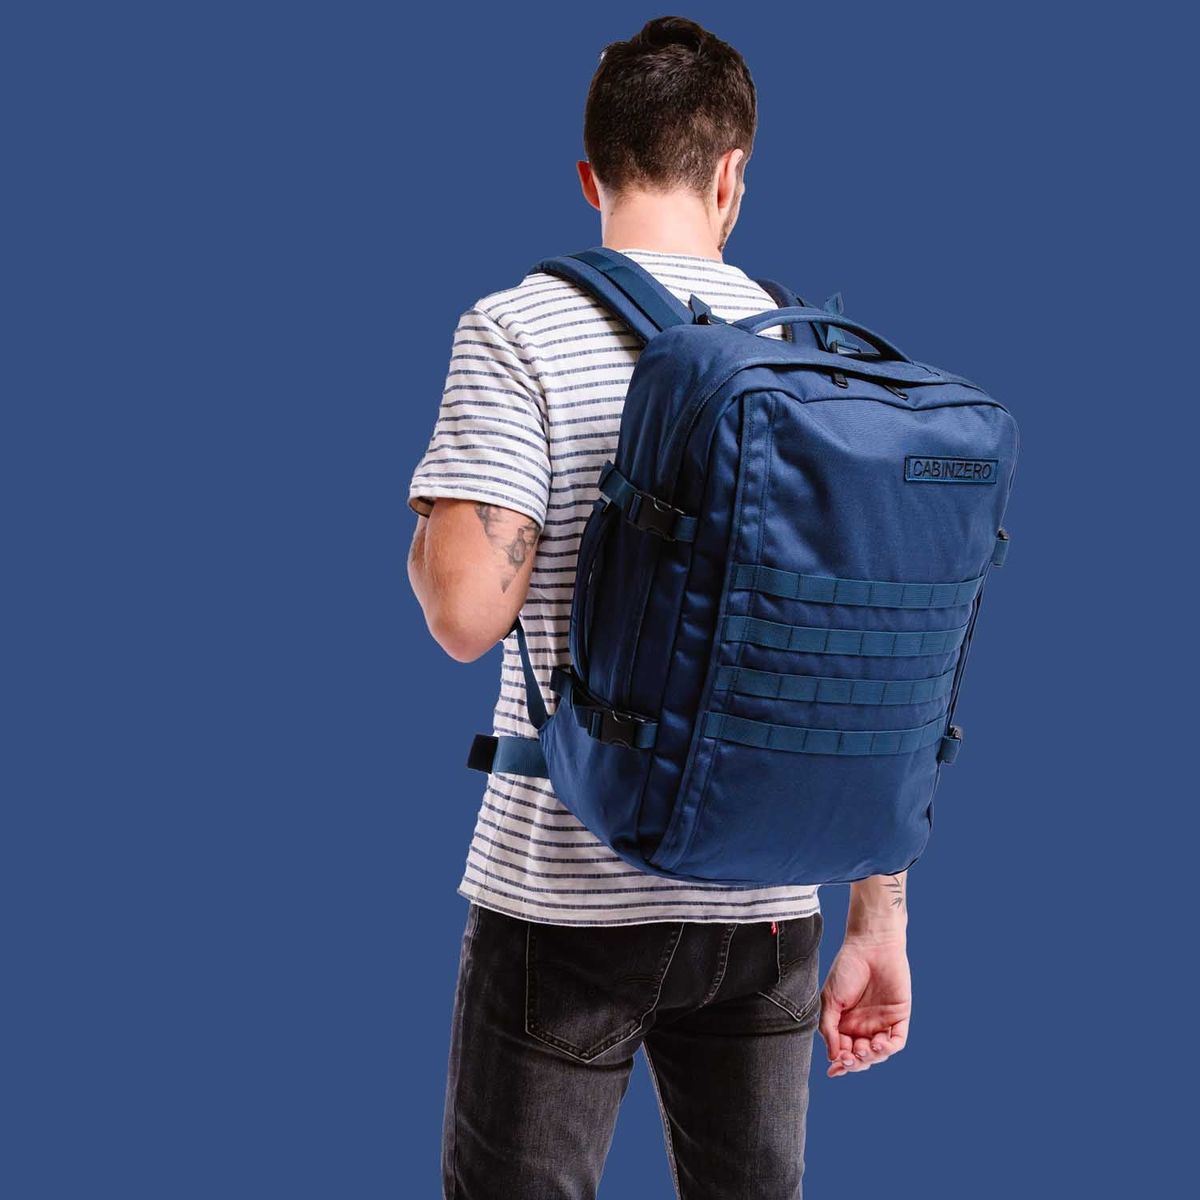 CainZero Military Backpack 44L -  Navy